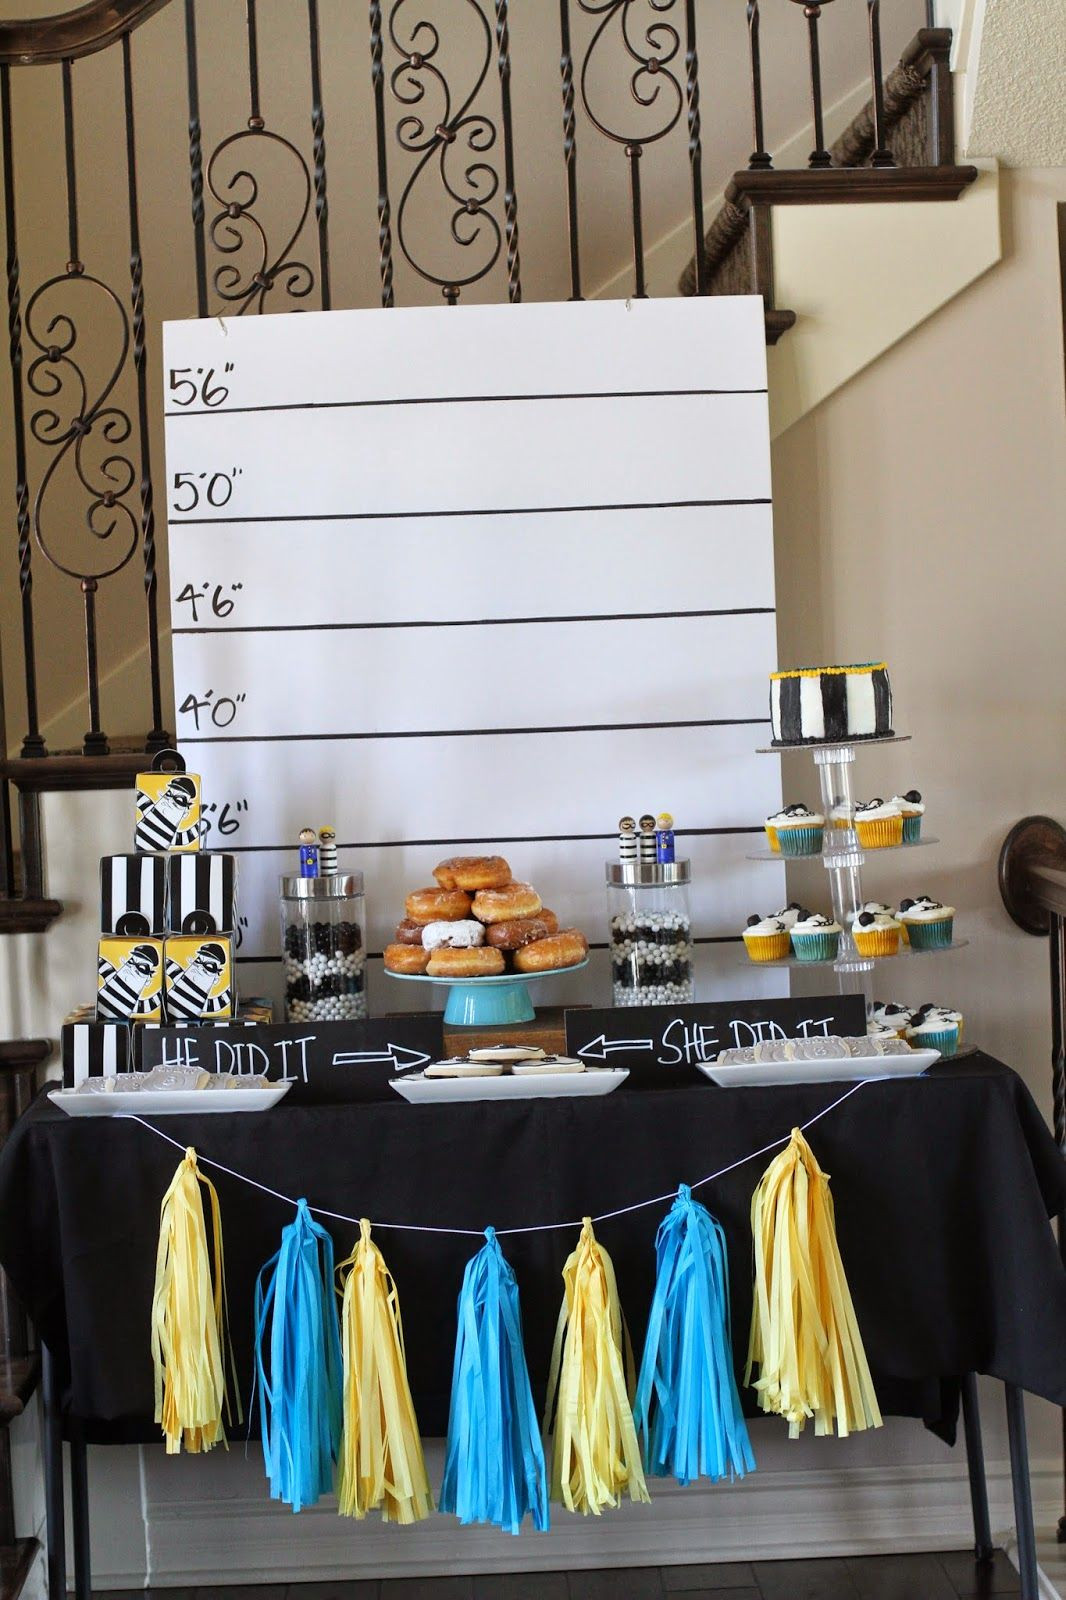 Police Academy Graduation Party Ideas
 Cops Robbers party Celebrations Holidays